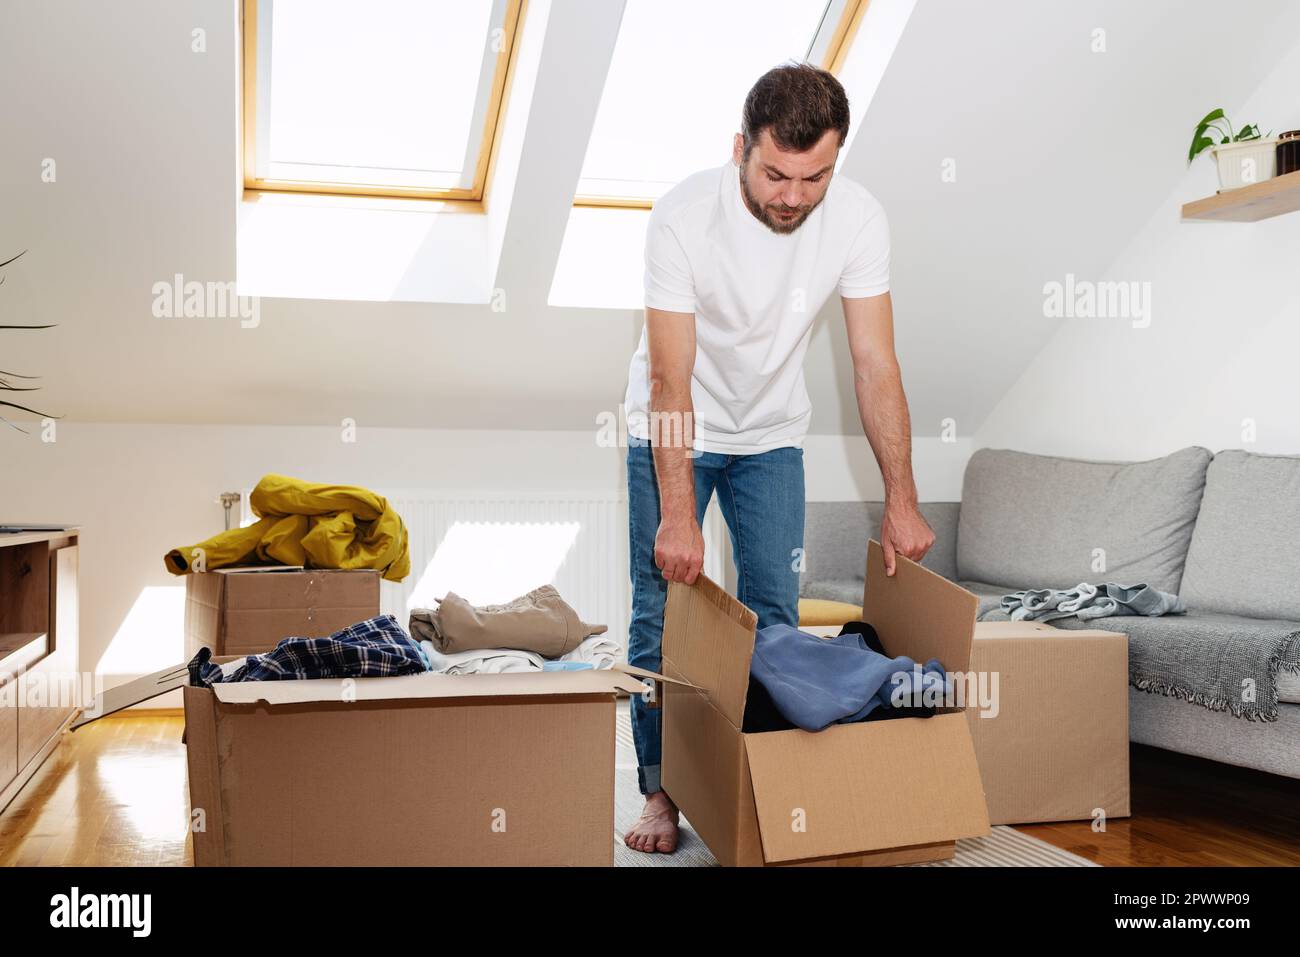 Man packing his old apparel into cardboard boxes at home, reusing, second hands concept. Stock Photo